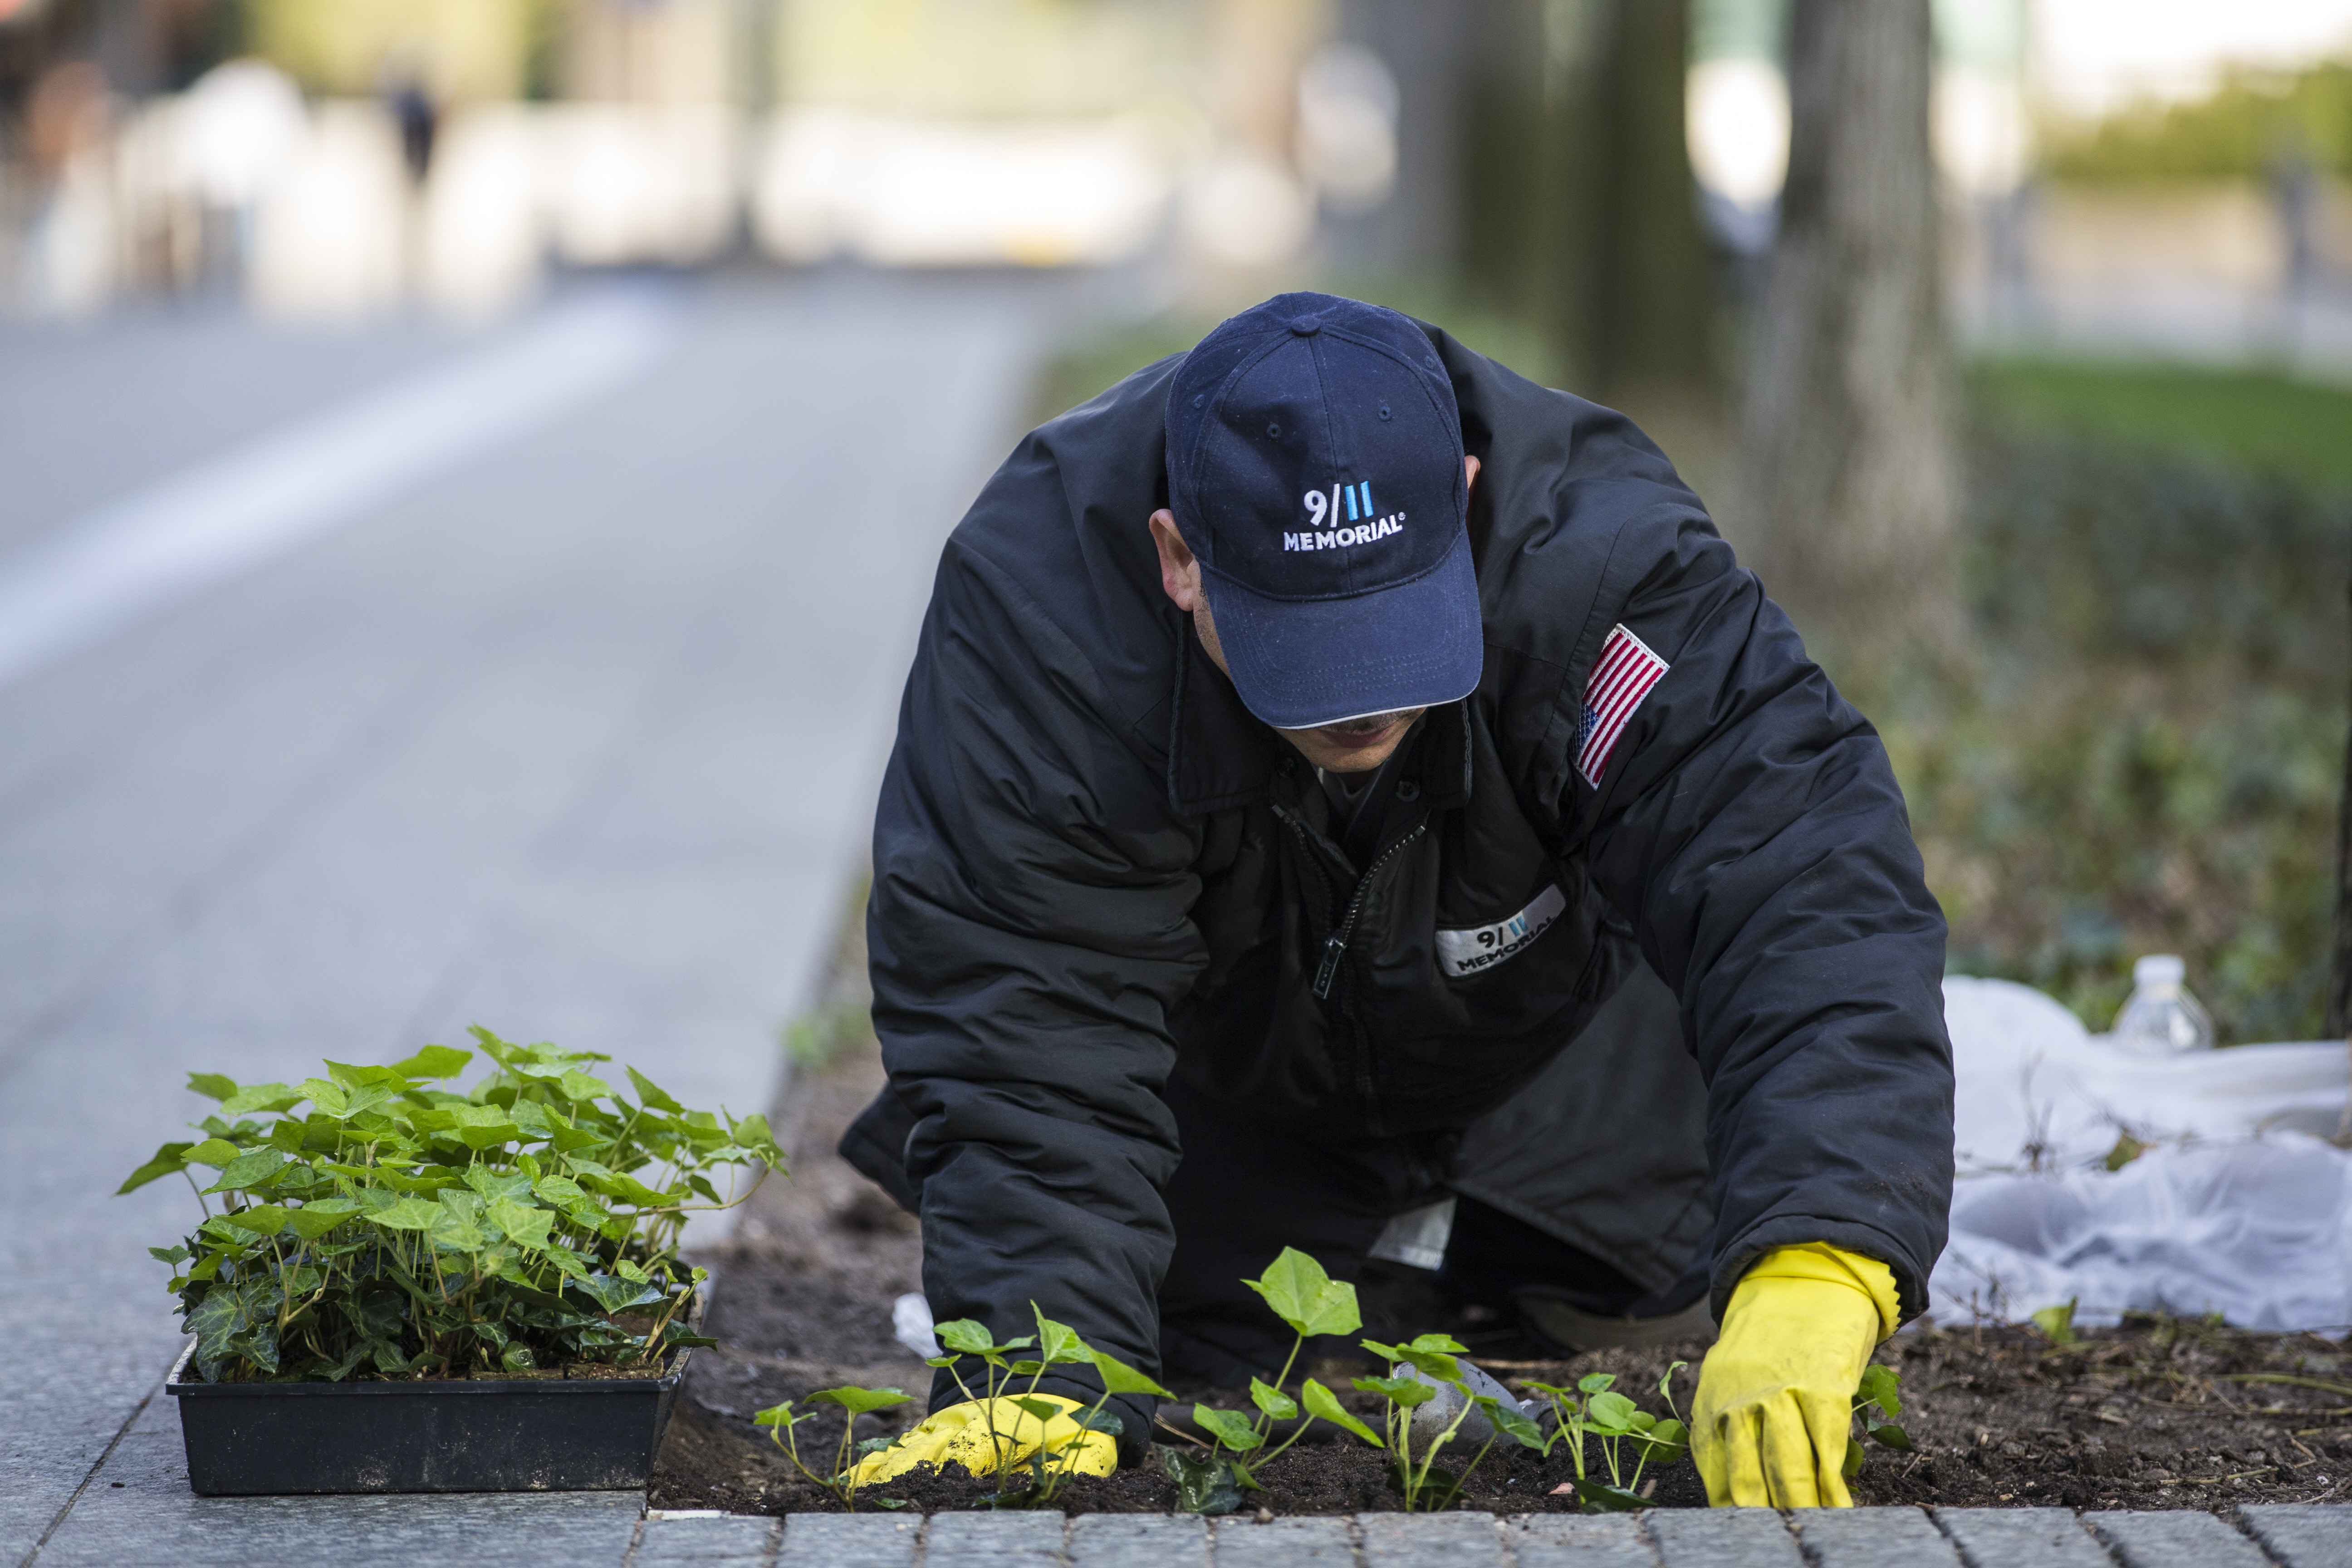 A Memorial plaza porter kneels down as he arranges plants in a plant bed beside a walkway.